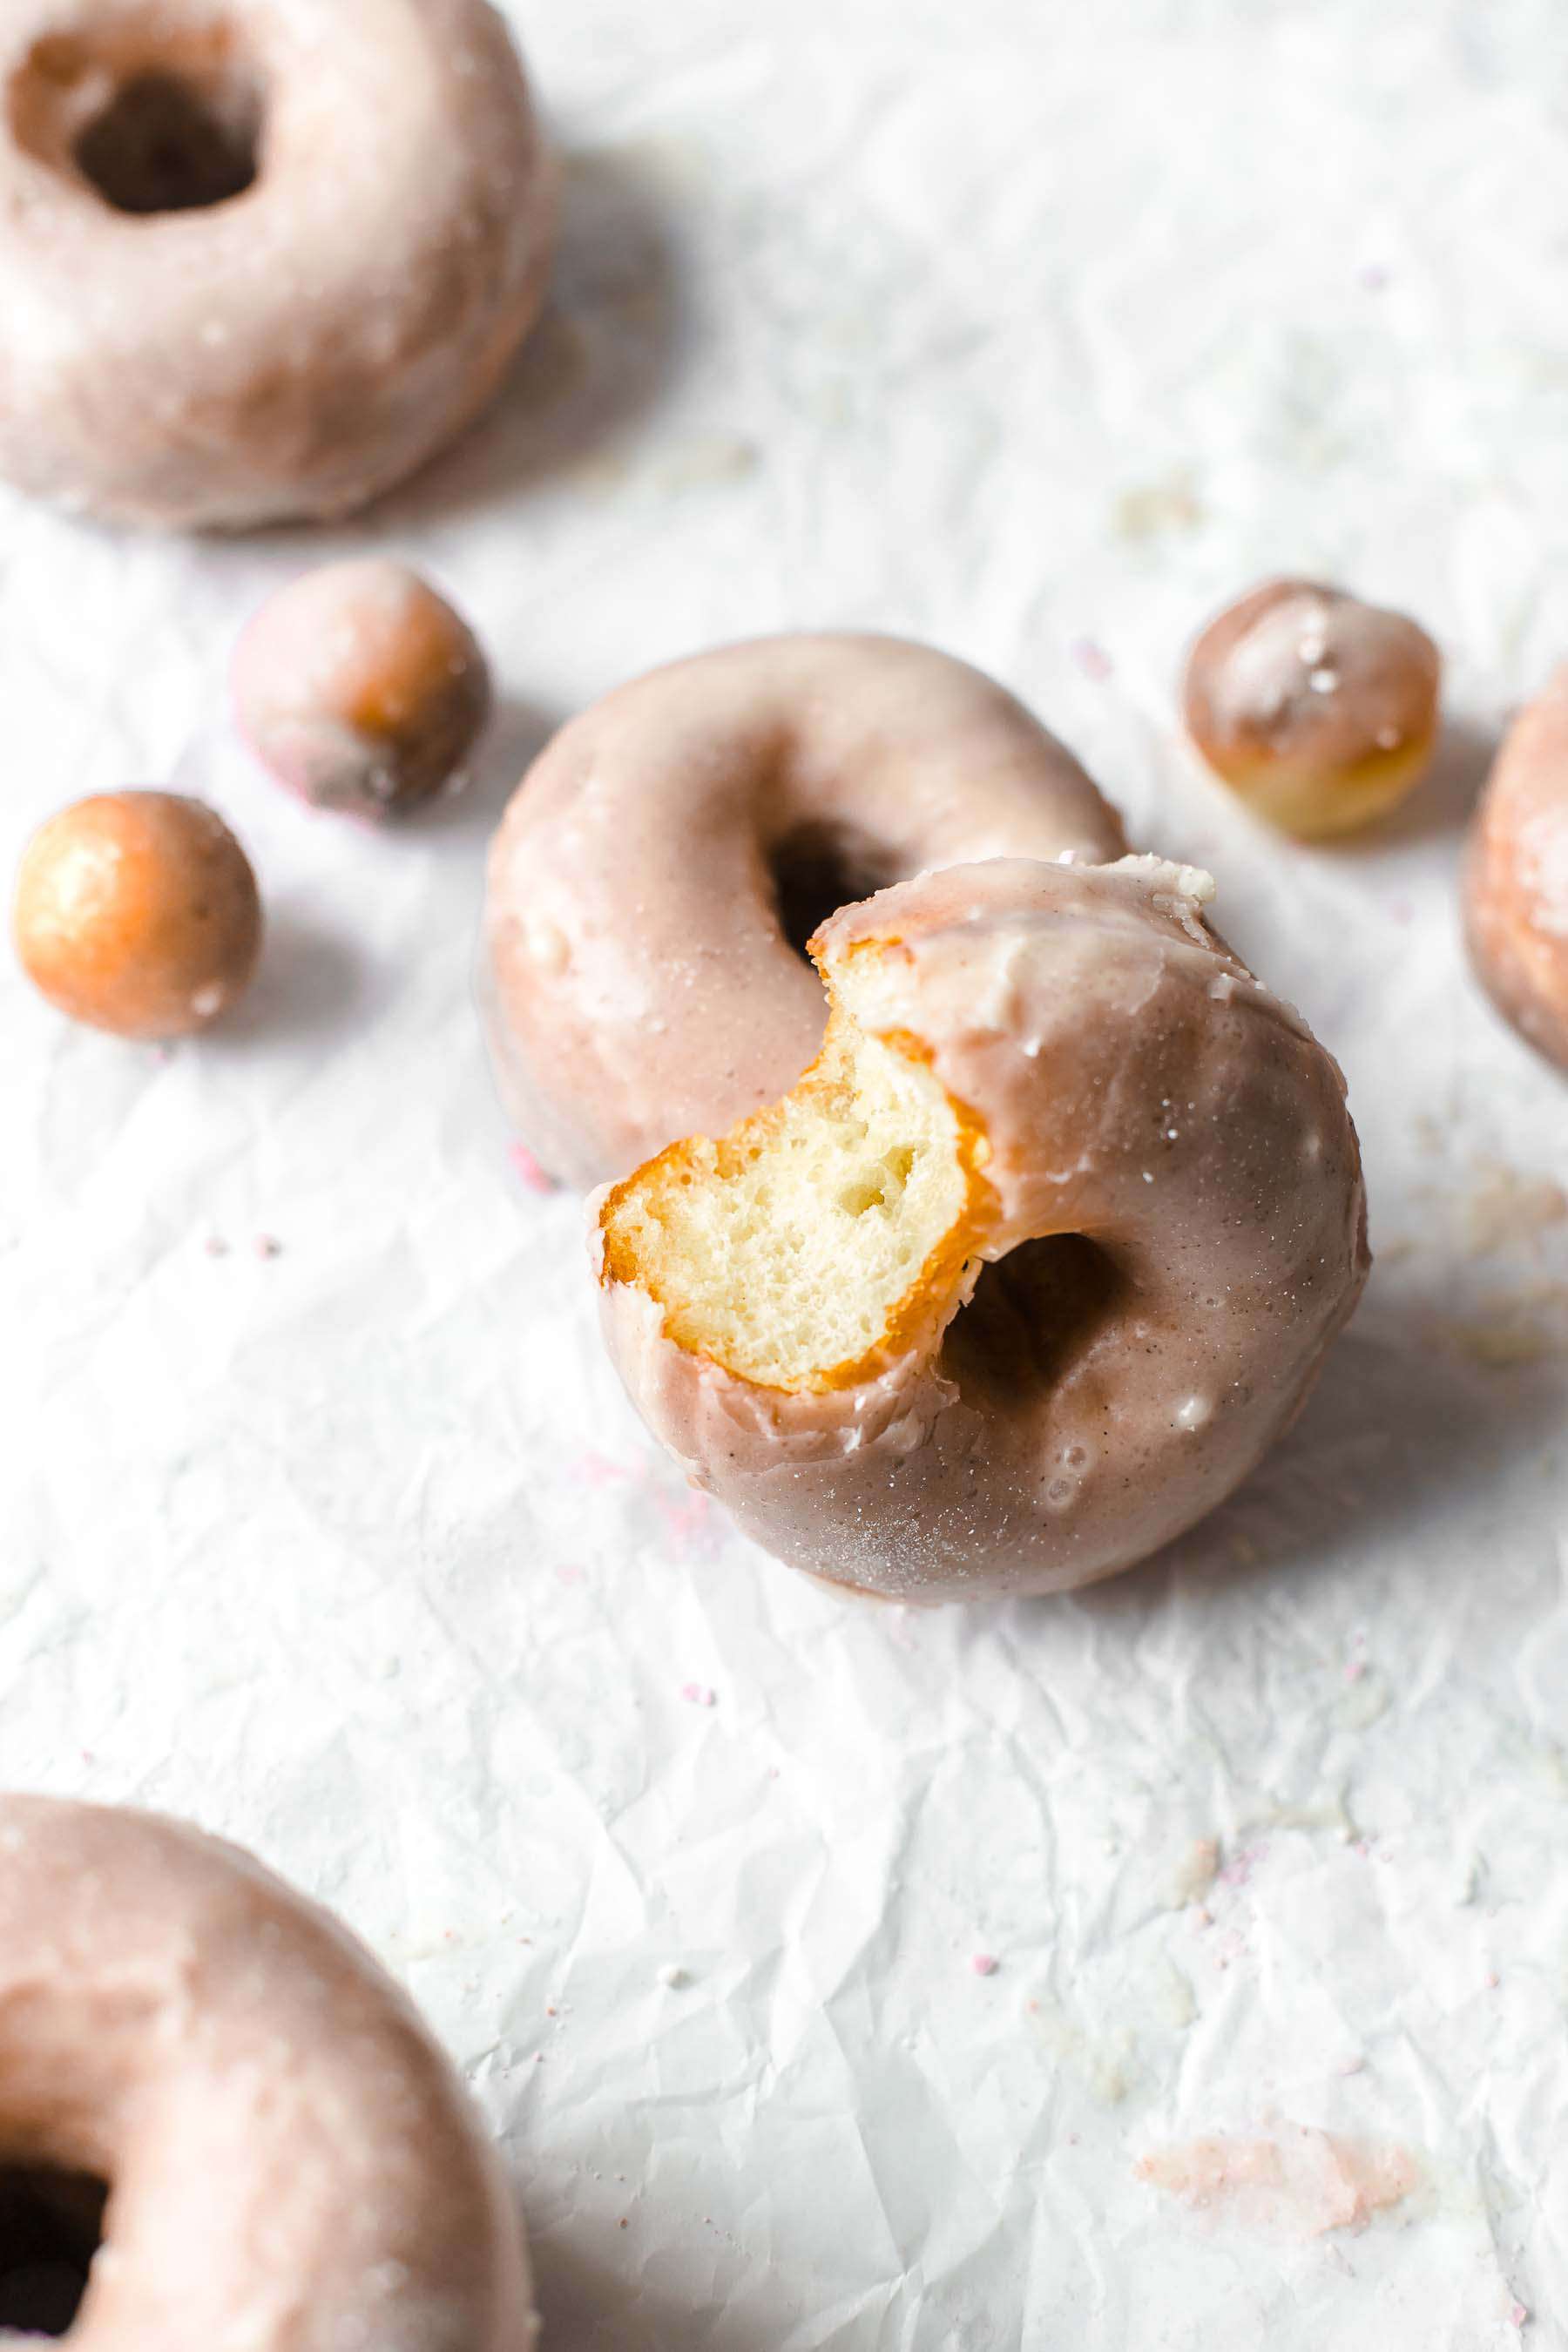 Bitten donut, donuts and donut holes on white background